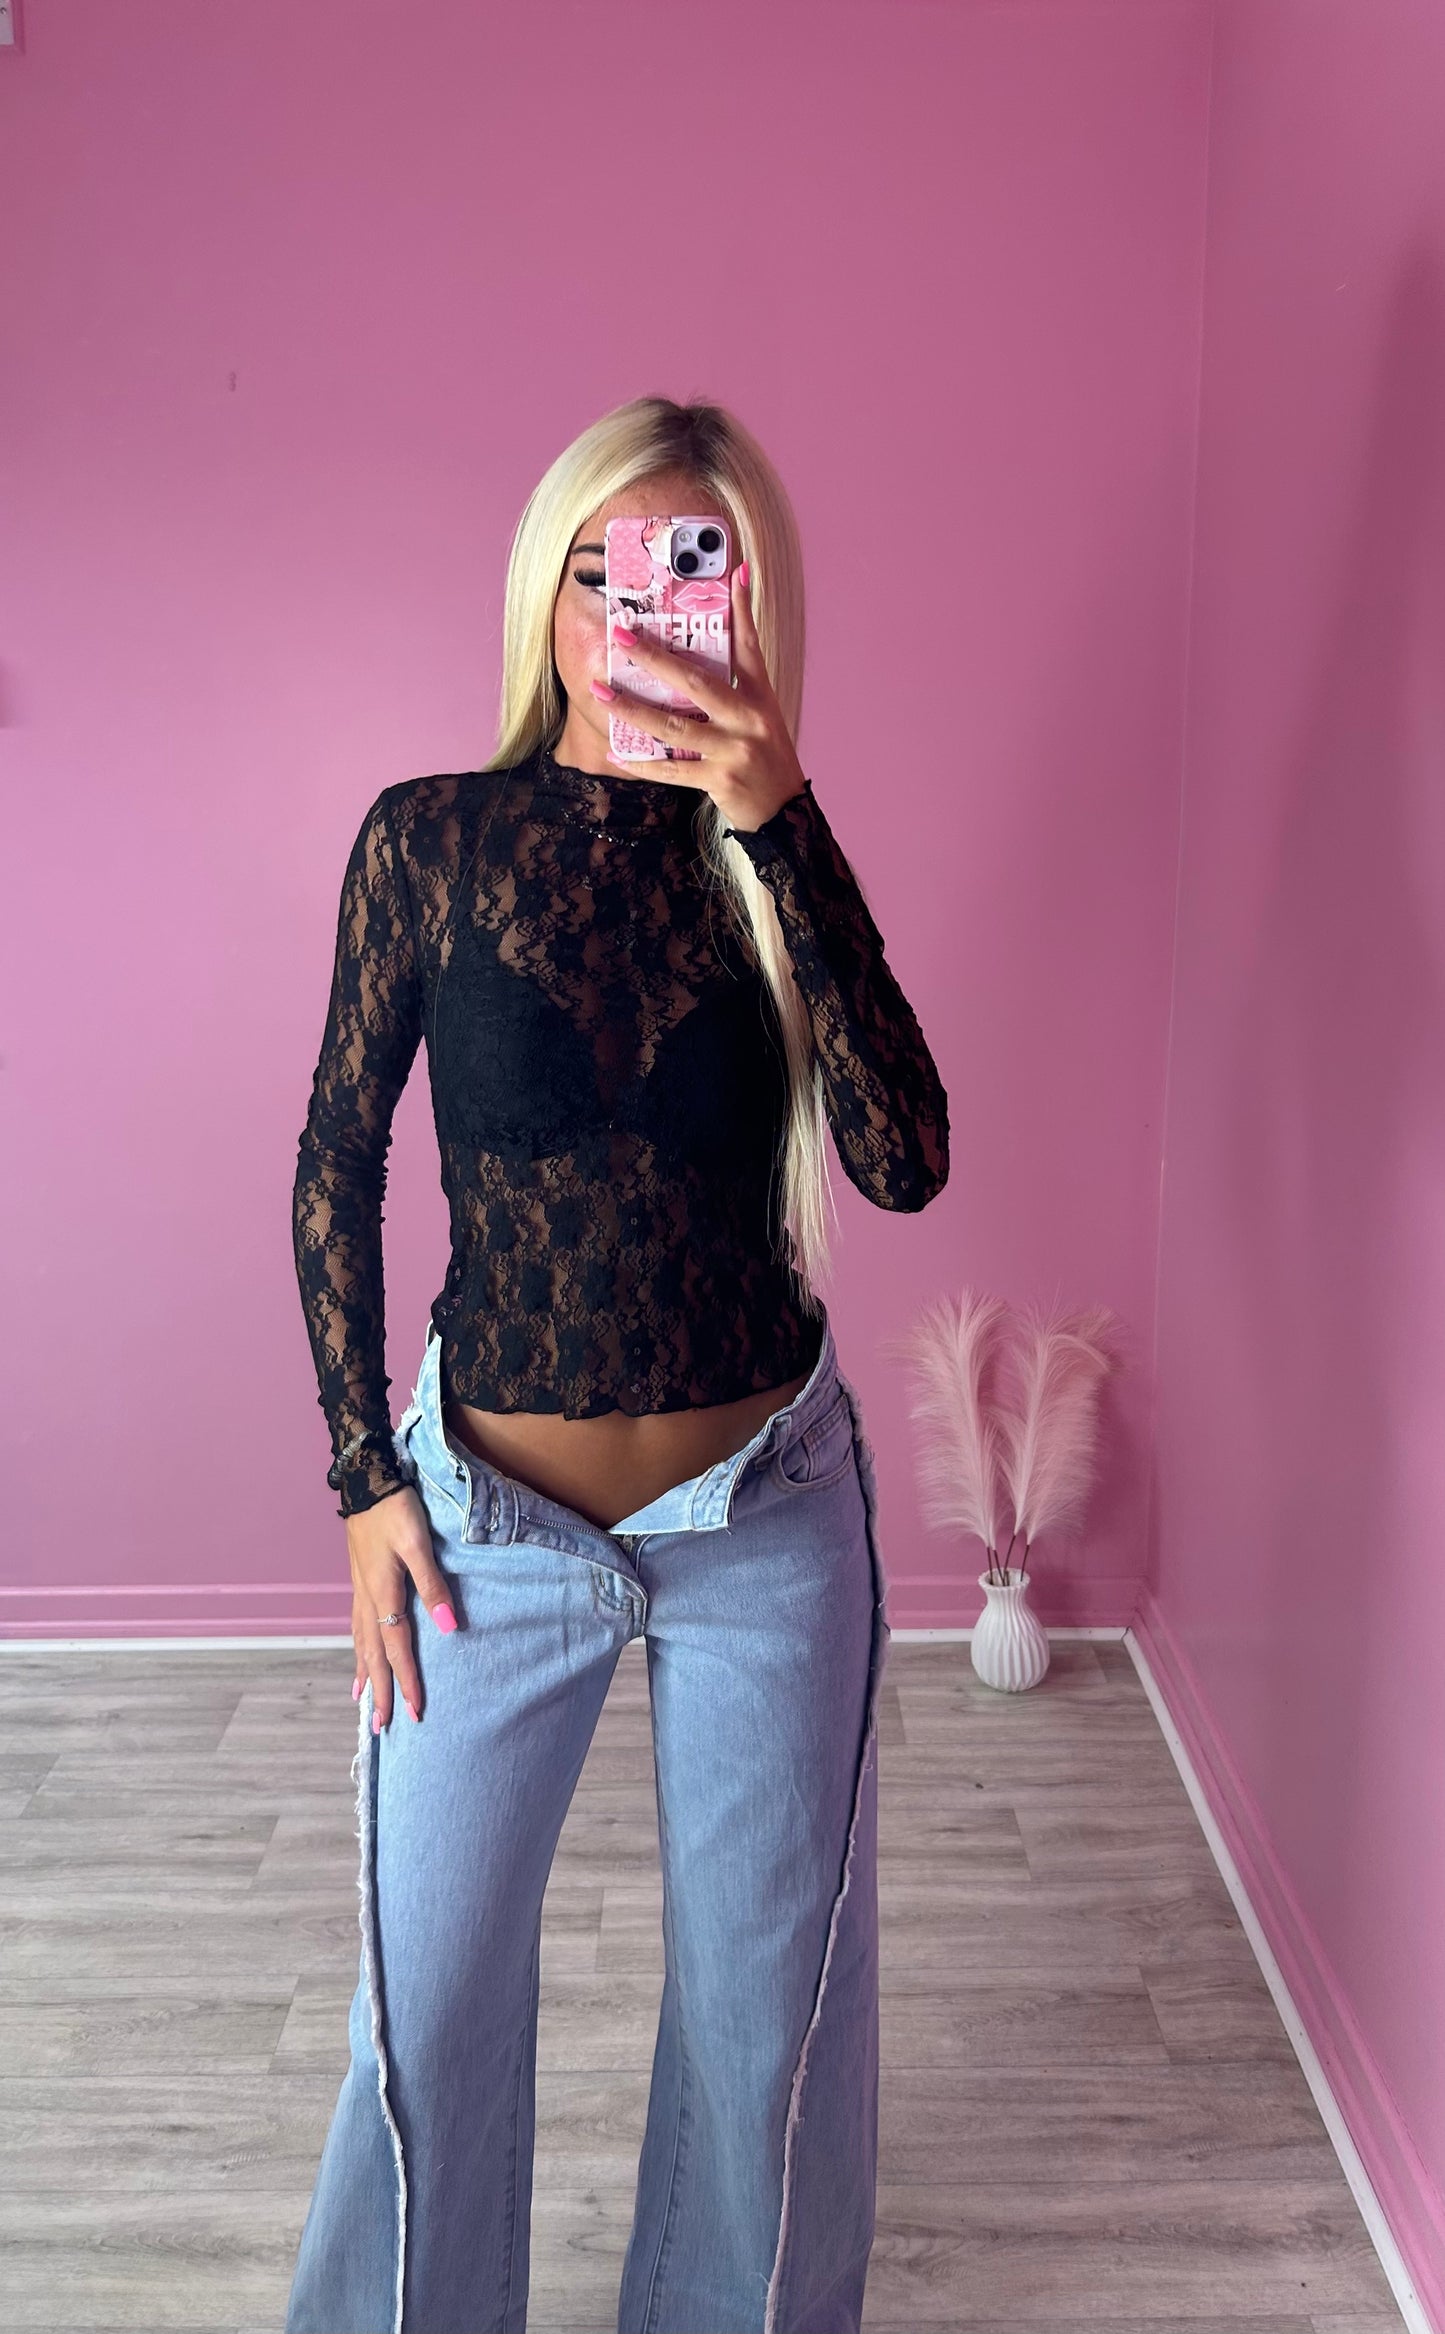 Black lace long sleeve top